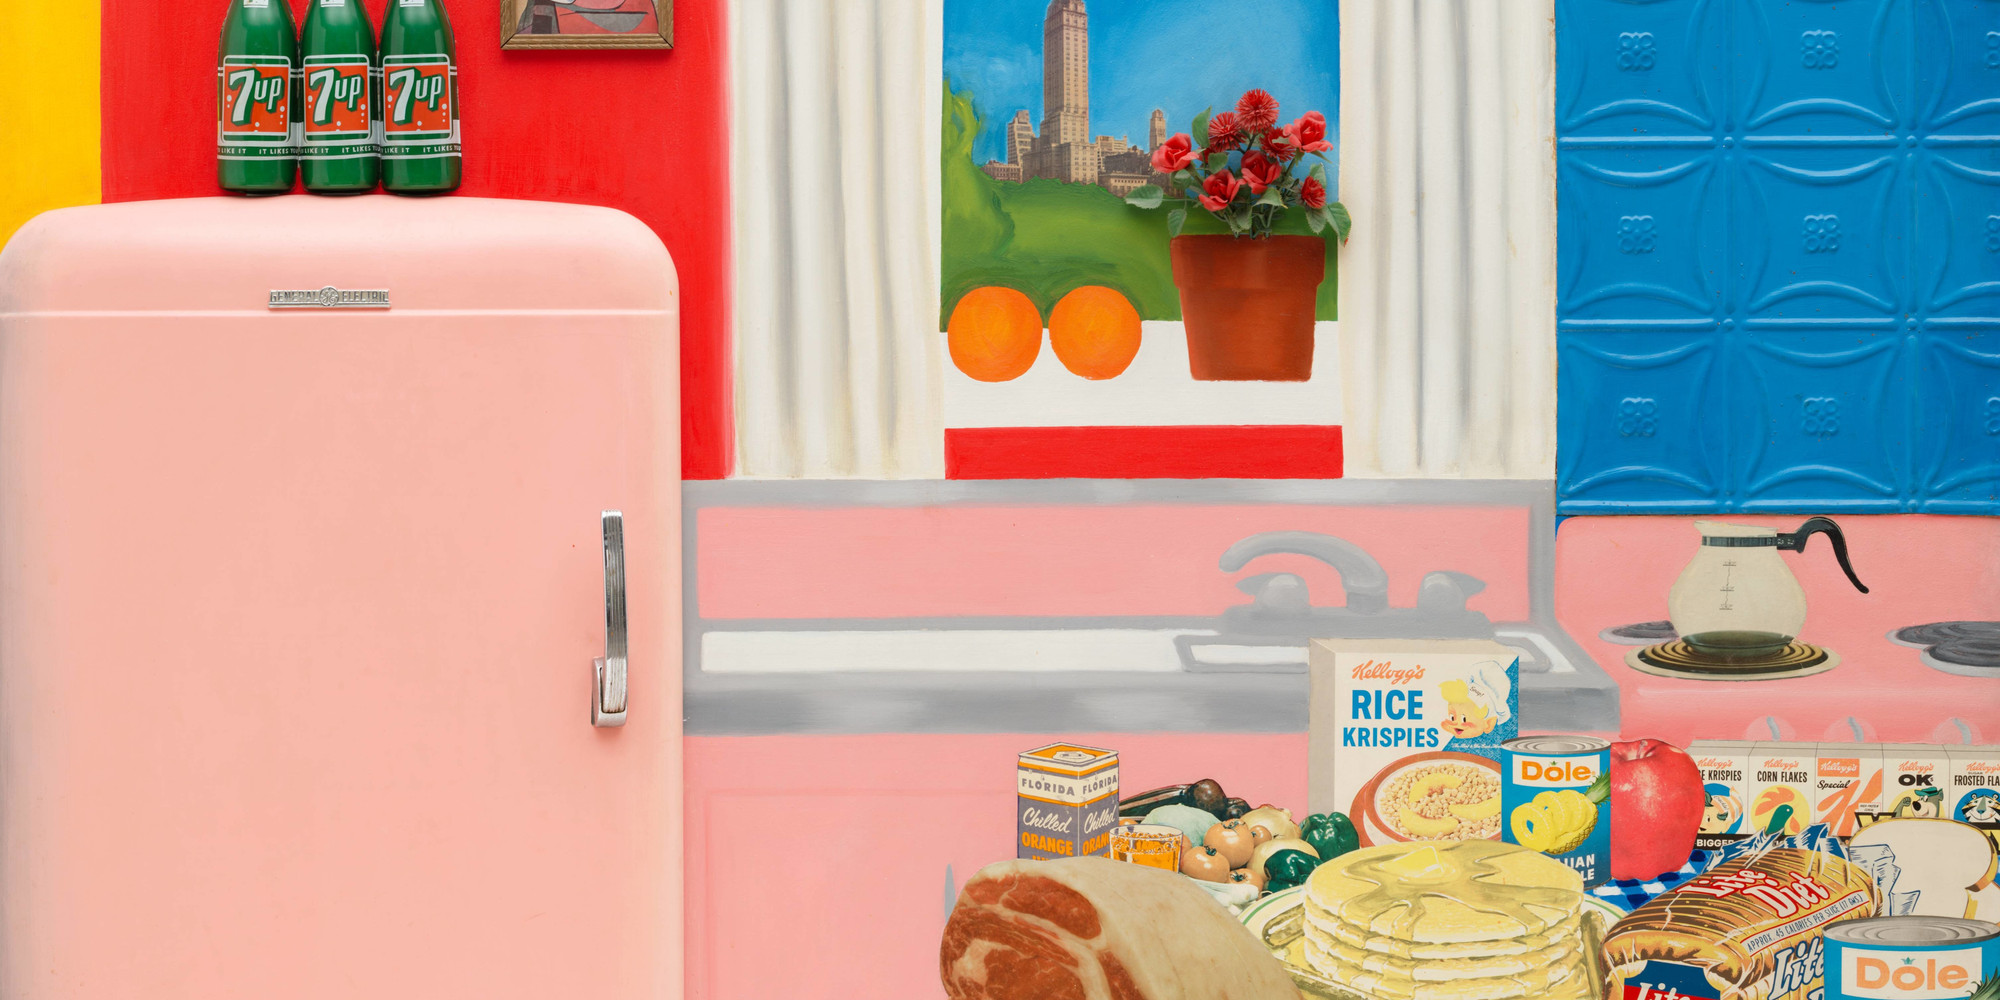 Tom Wesselmann. Still Life #30. 1963. Oil, enamel and synthetic polymer paint on composition board with collage of printed advertisements, plastic flowers, refrigerator door, plastic replicas of 7-Up bottles, glazed and framed color reproduction, and stamped metal, 48 1/2 × 66 × 4&#34; (122 x 167.5 x 10 cm). Gift of Philip Johnson. © Tom Wesselmann/Licensed by VAGA, New York, NY